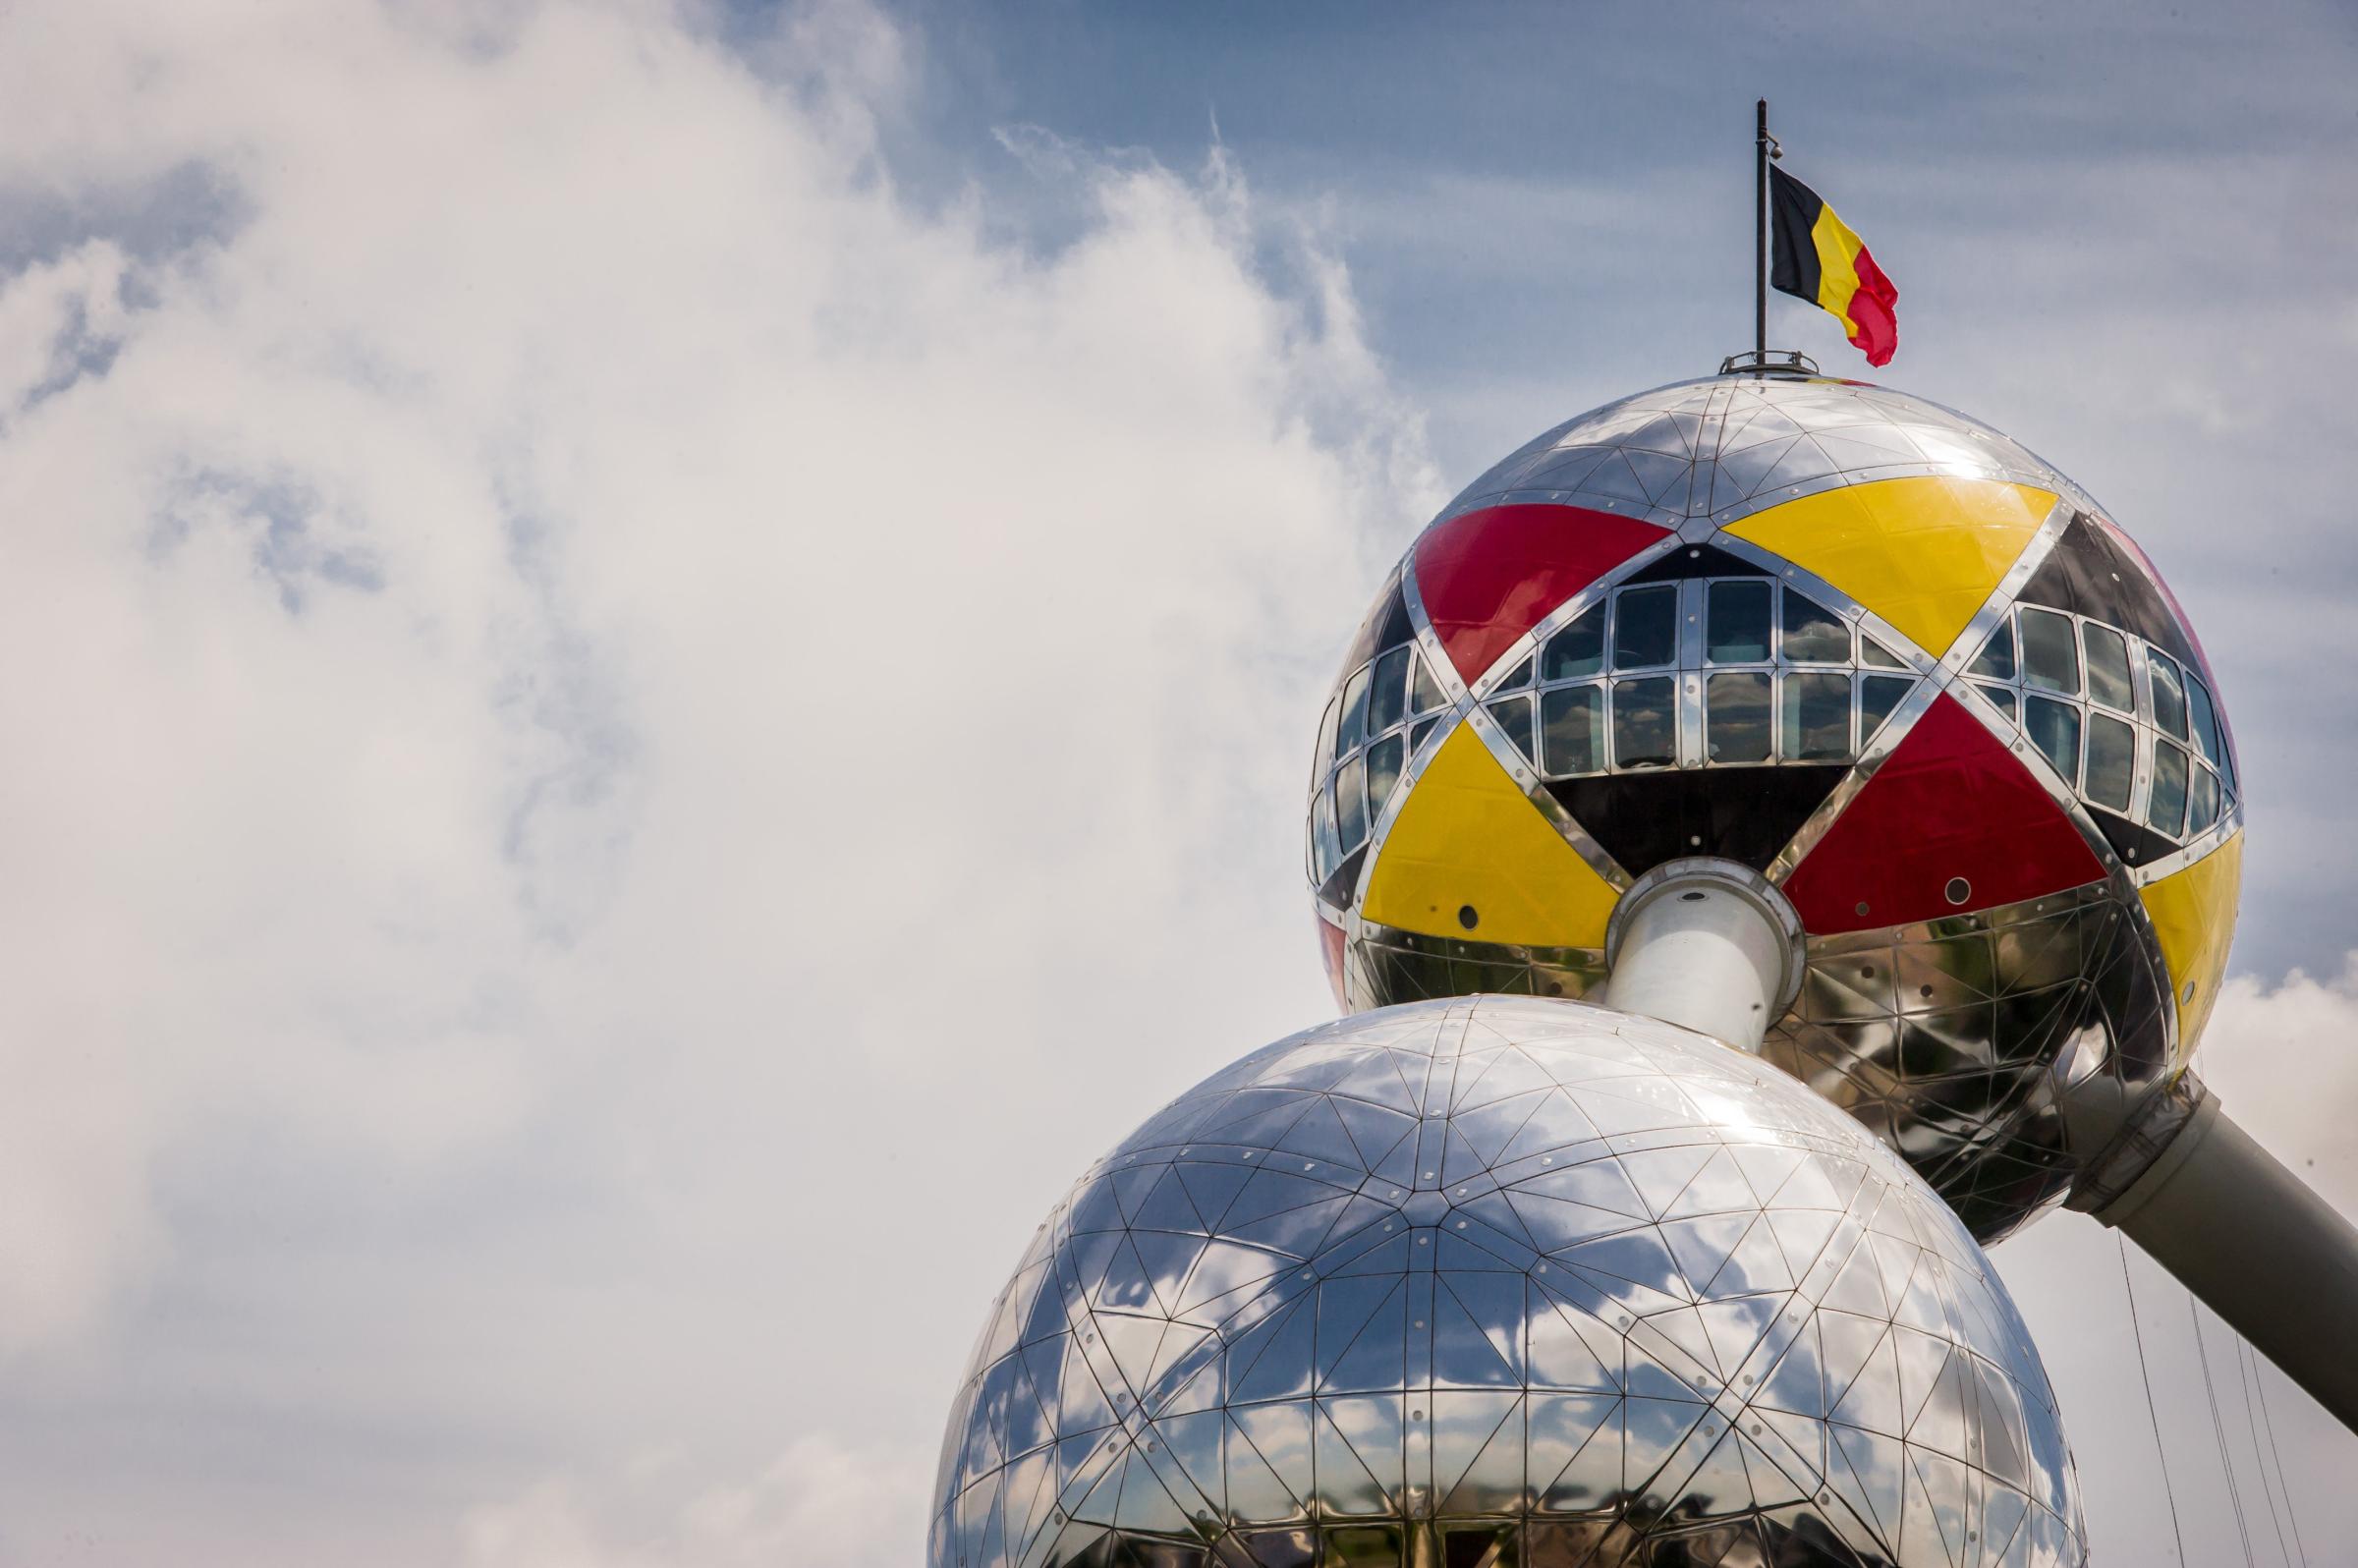 The upper sphere of the Atomium in Brussels is wrapped with the Belgian colors to support the Belgian national soccer team at the World Cup soccer in Brazil on June 13, 2014.